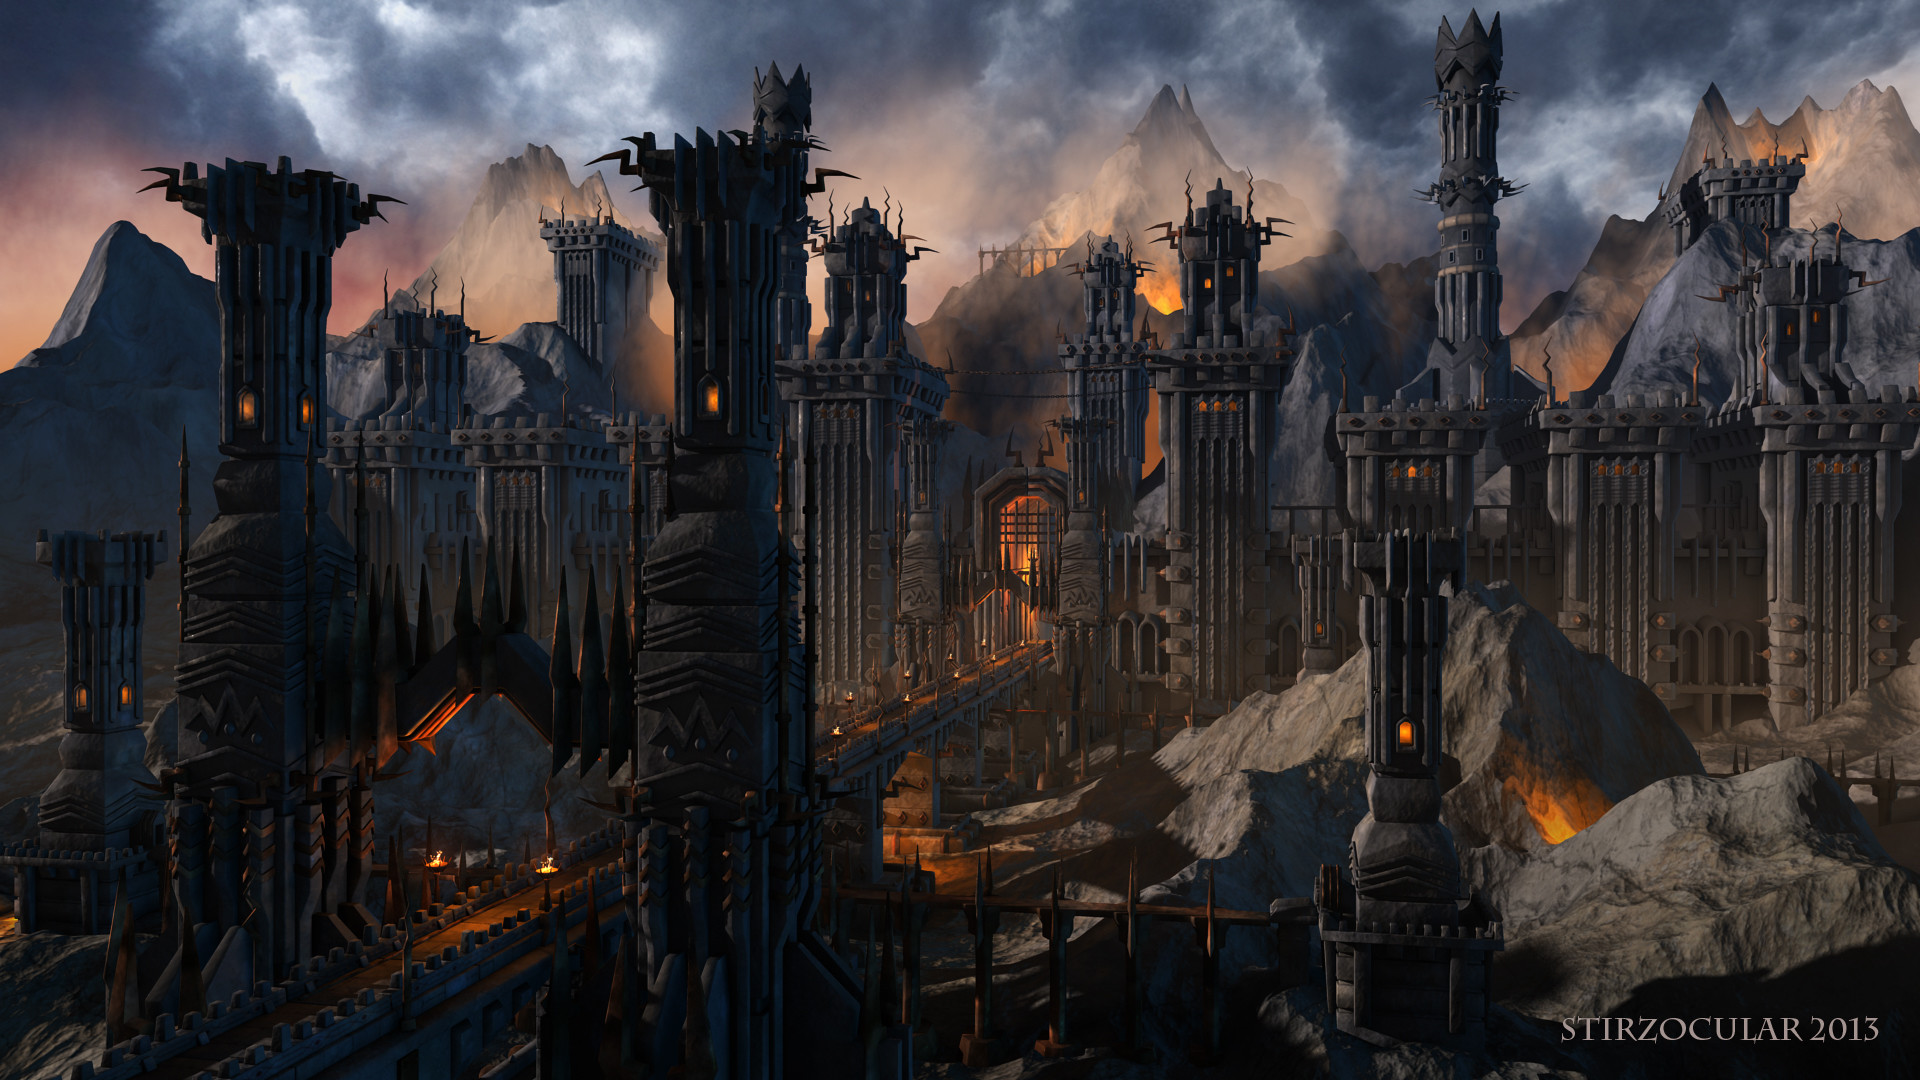 1920x1080 Angband rebuild 01 by Stirzocular Angband rebuild 01 by Stirzocular